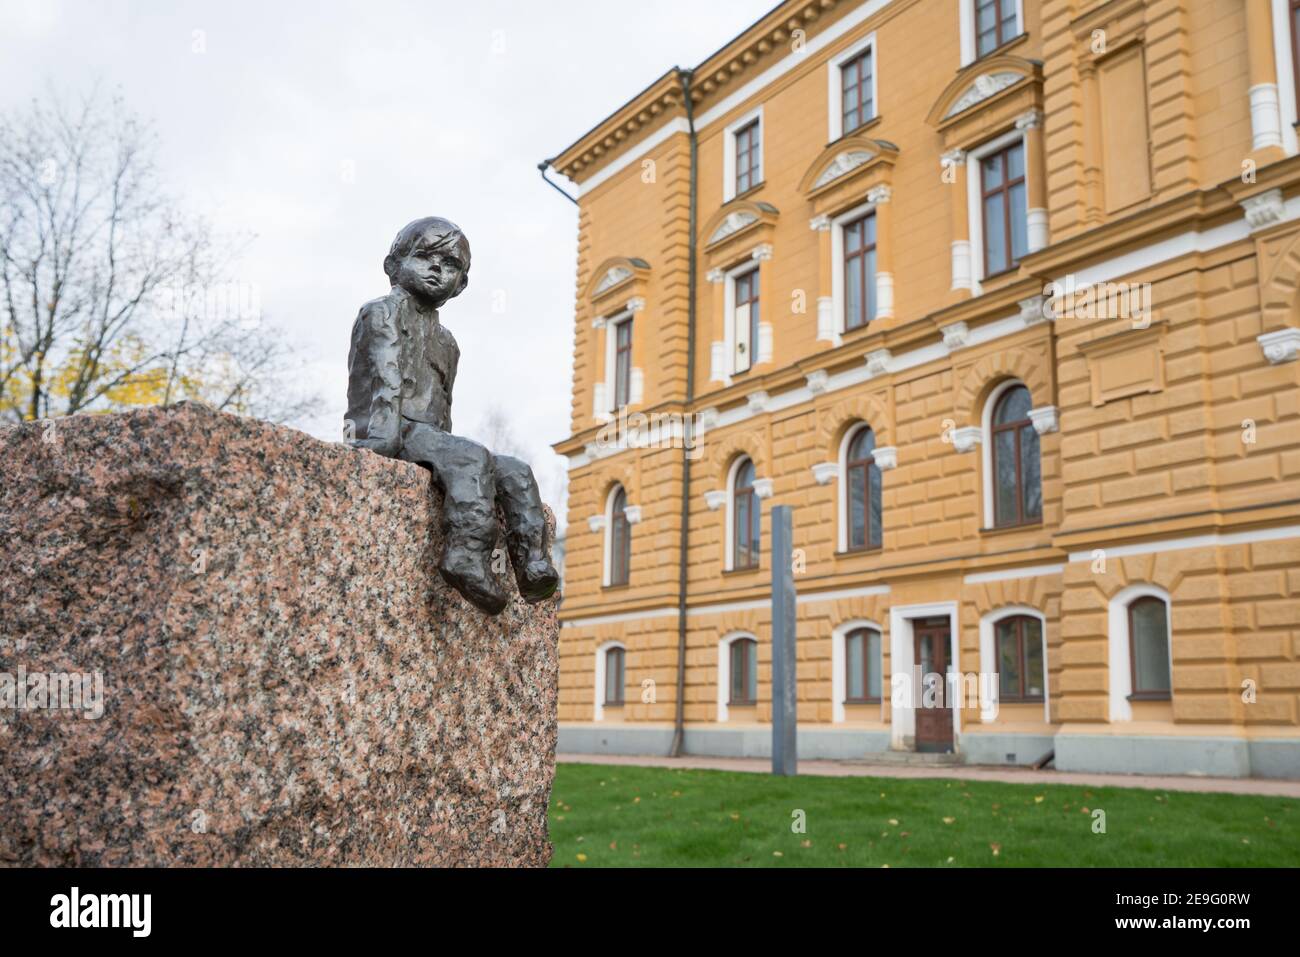 OULU, FINLAND - October 12, 2020: Close up of young finish boy bronze sculpture sitting in front of city hall on granite smiling at the Passage of Tim Stock Photo